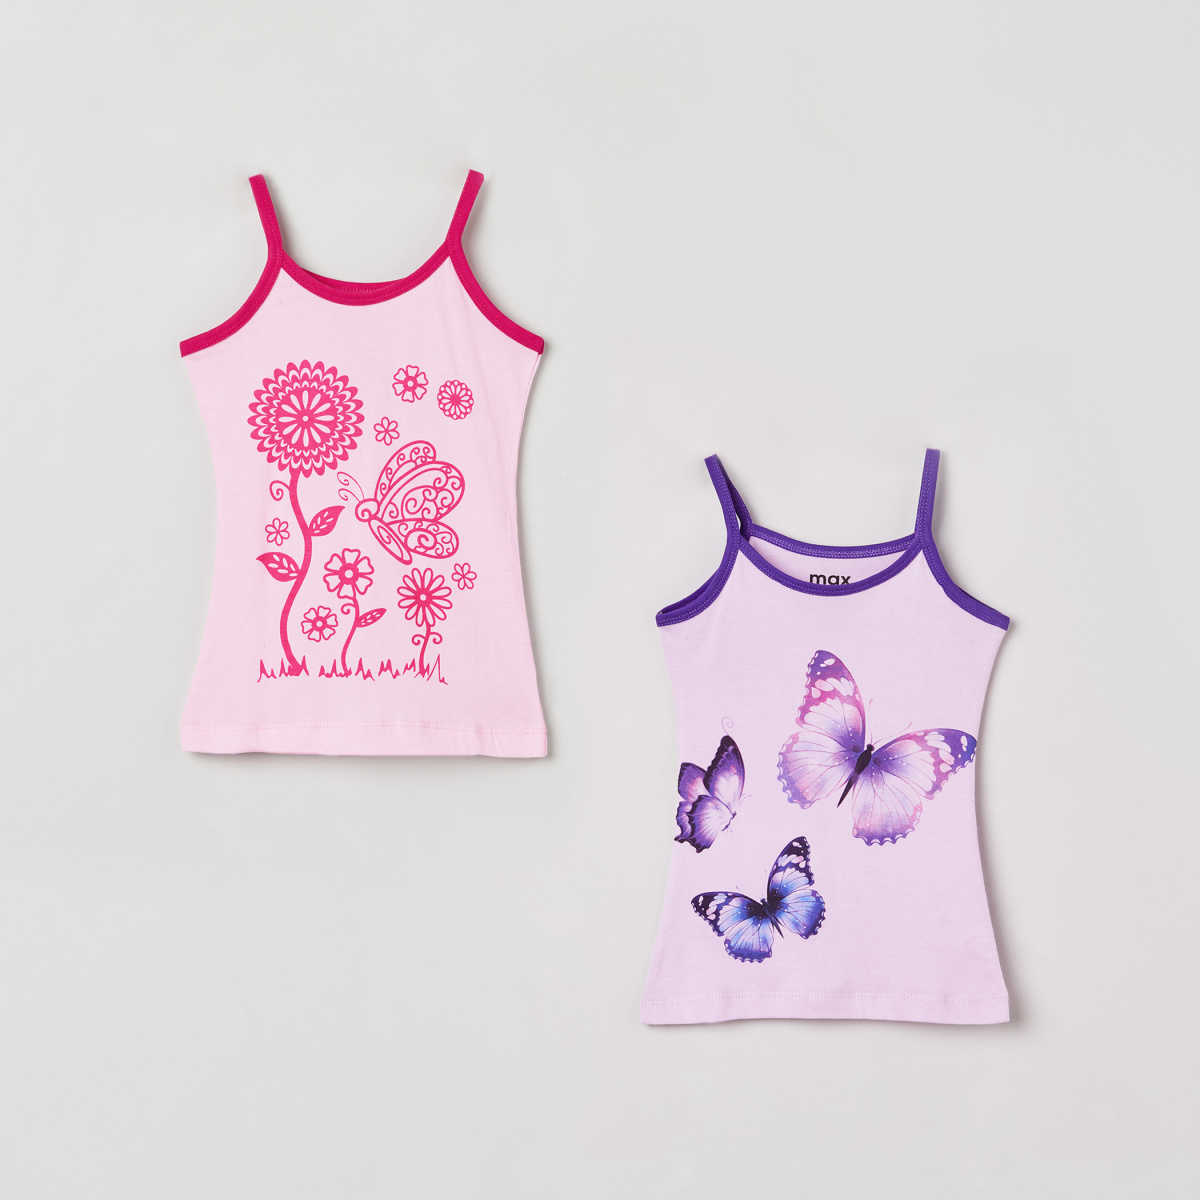 MAX Printed Camisoles - Pack of 2